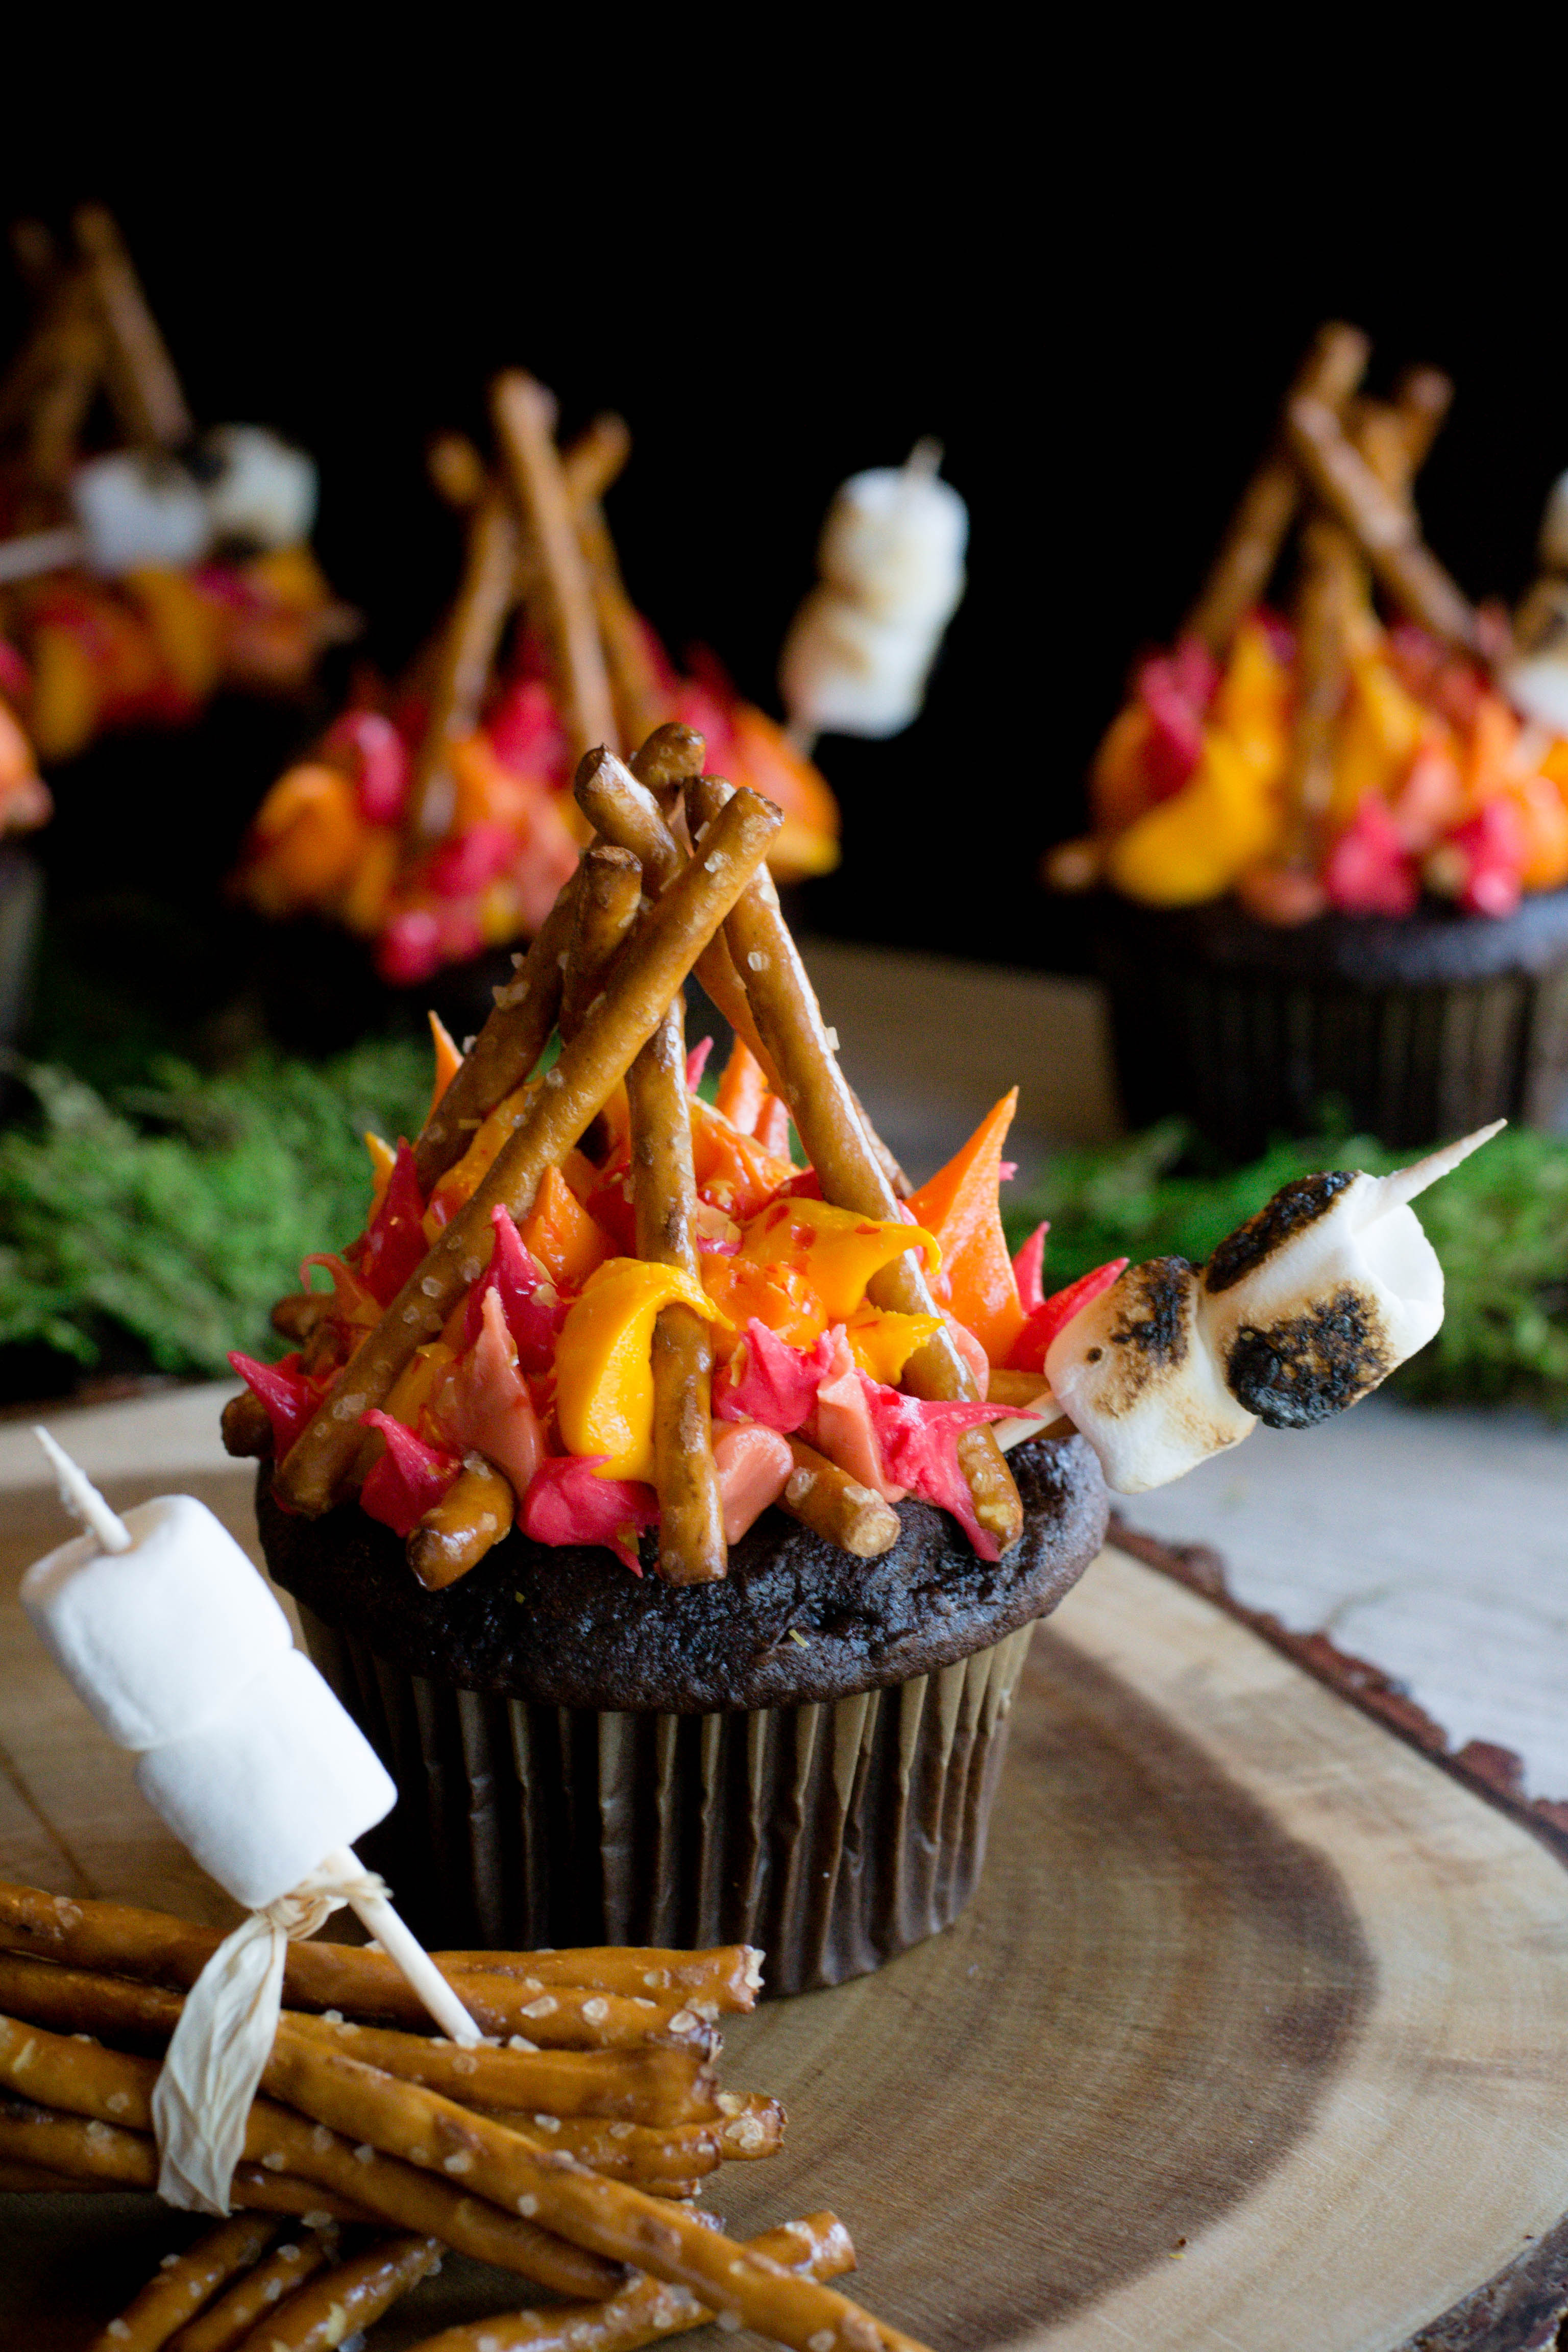 Campfire Cupcakes What the Forks for Dinner?